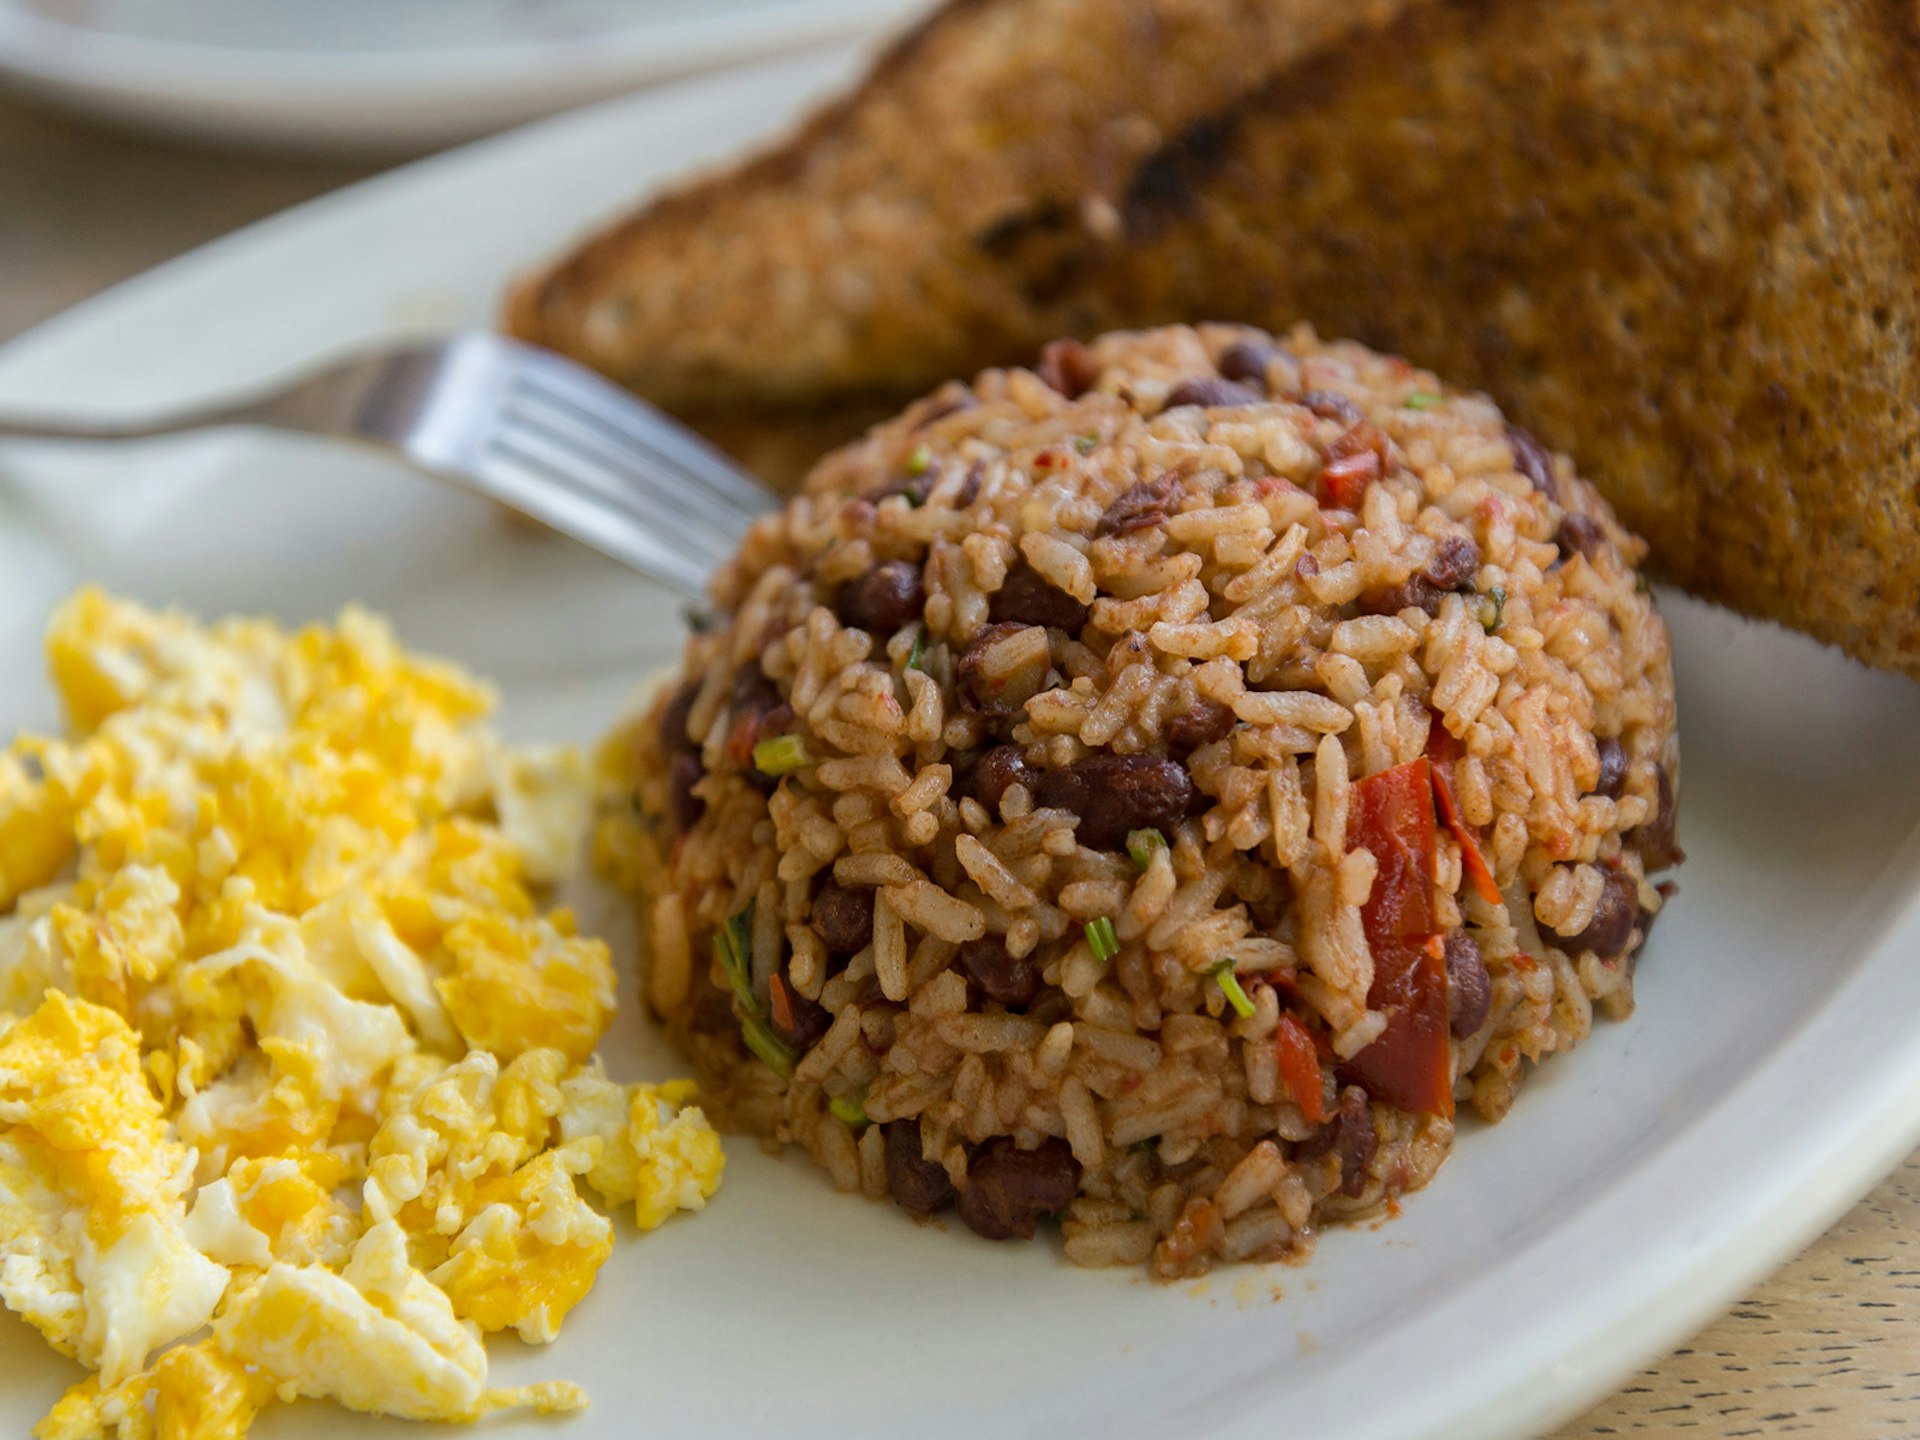 Gallo Pinto is a typical Costa Rican breakfast made of rice and beans. It's traditionally served with eggs © Maria Esther Abissi / Lonely Planet